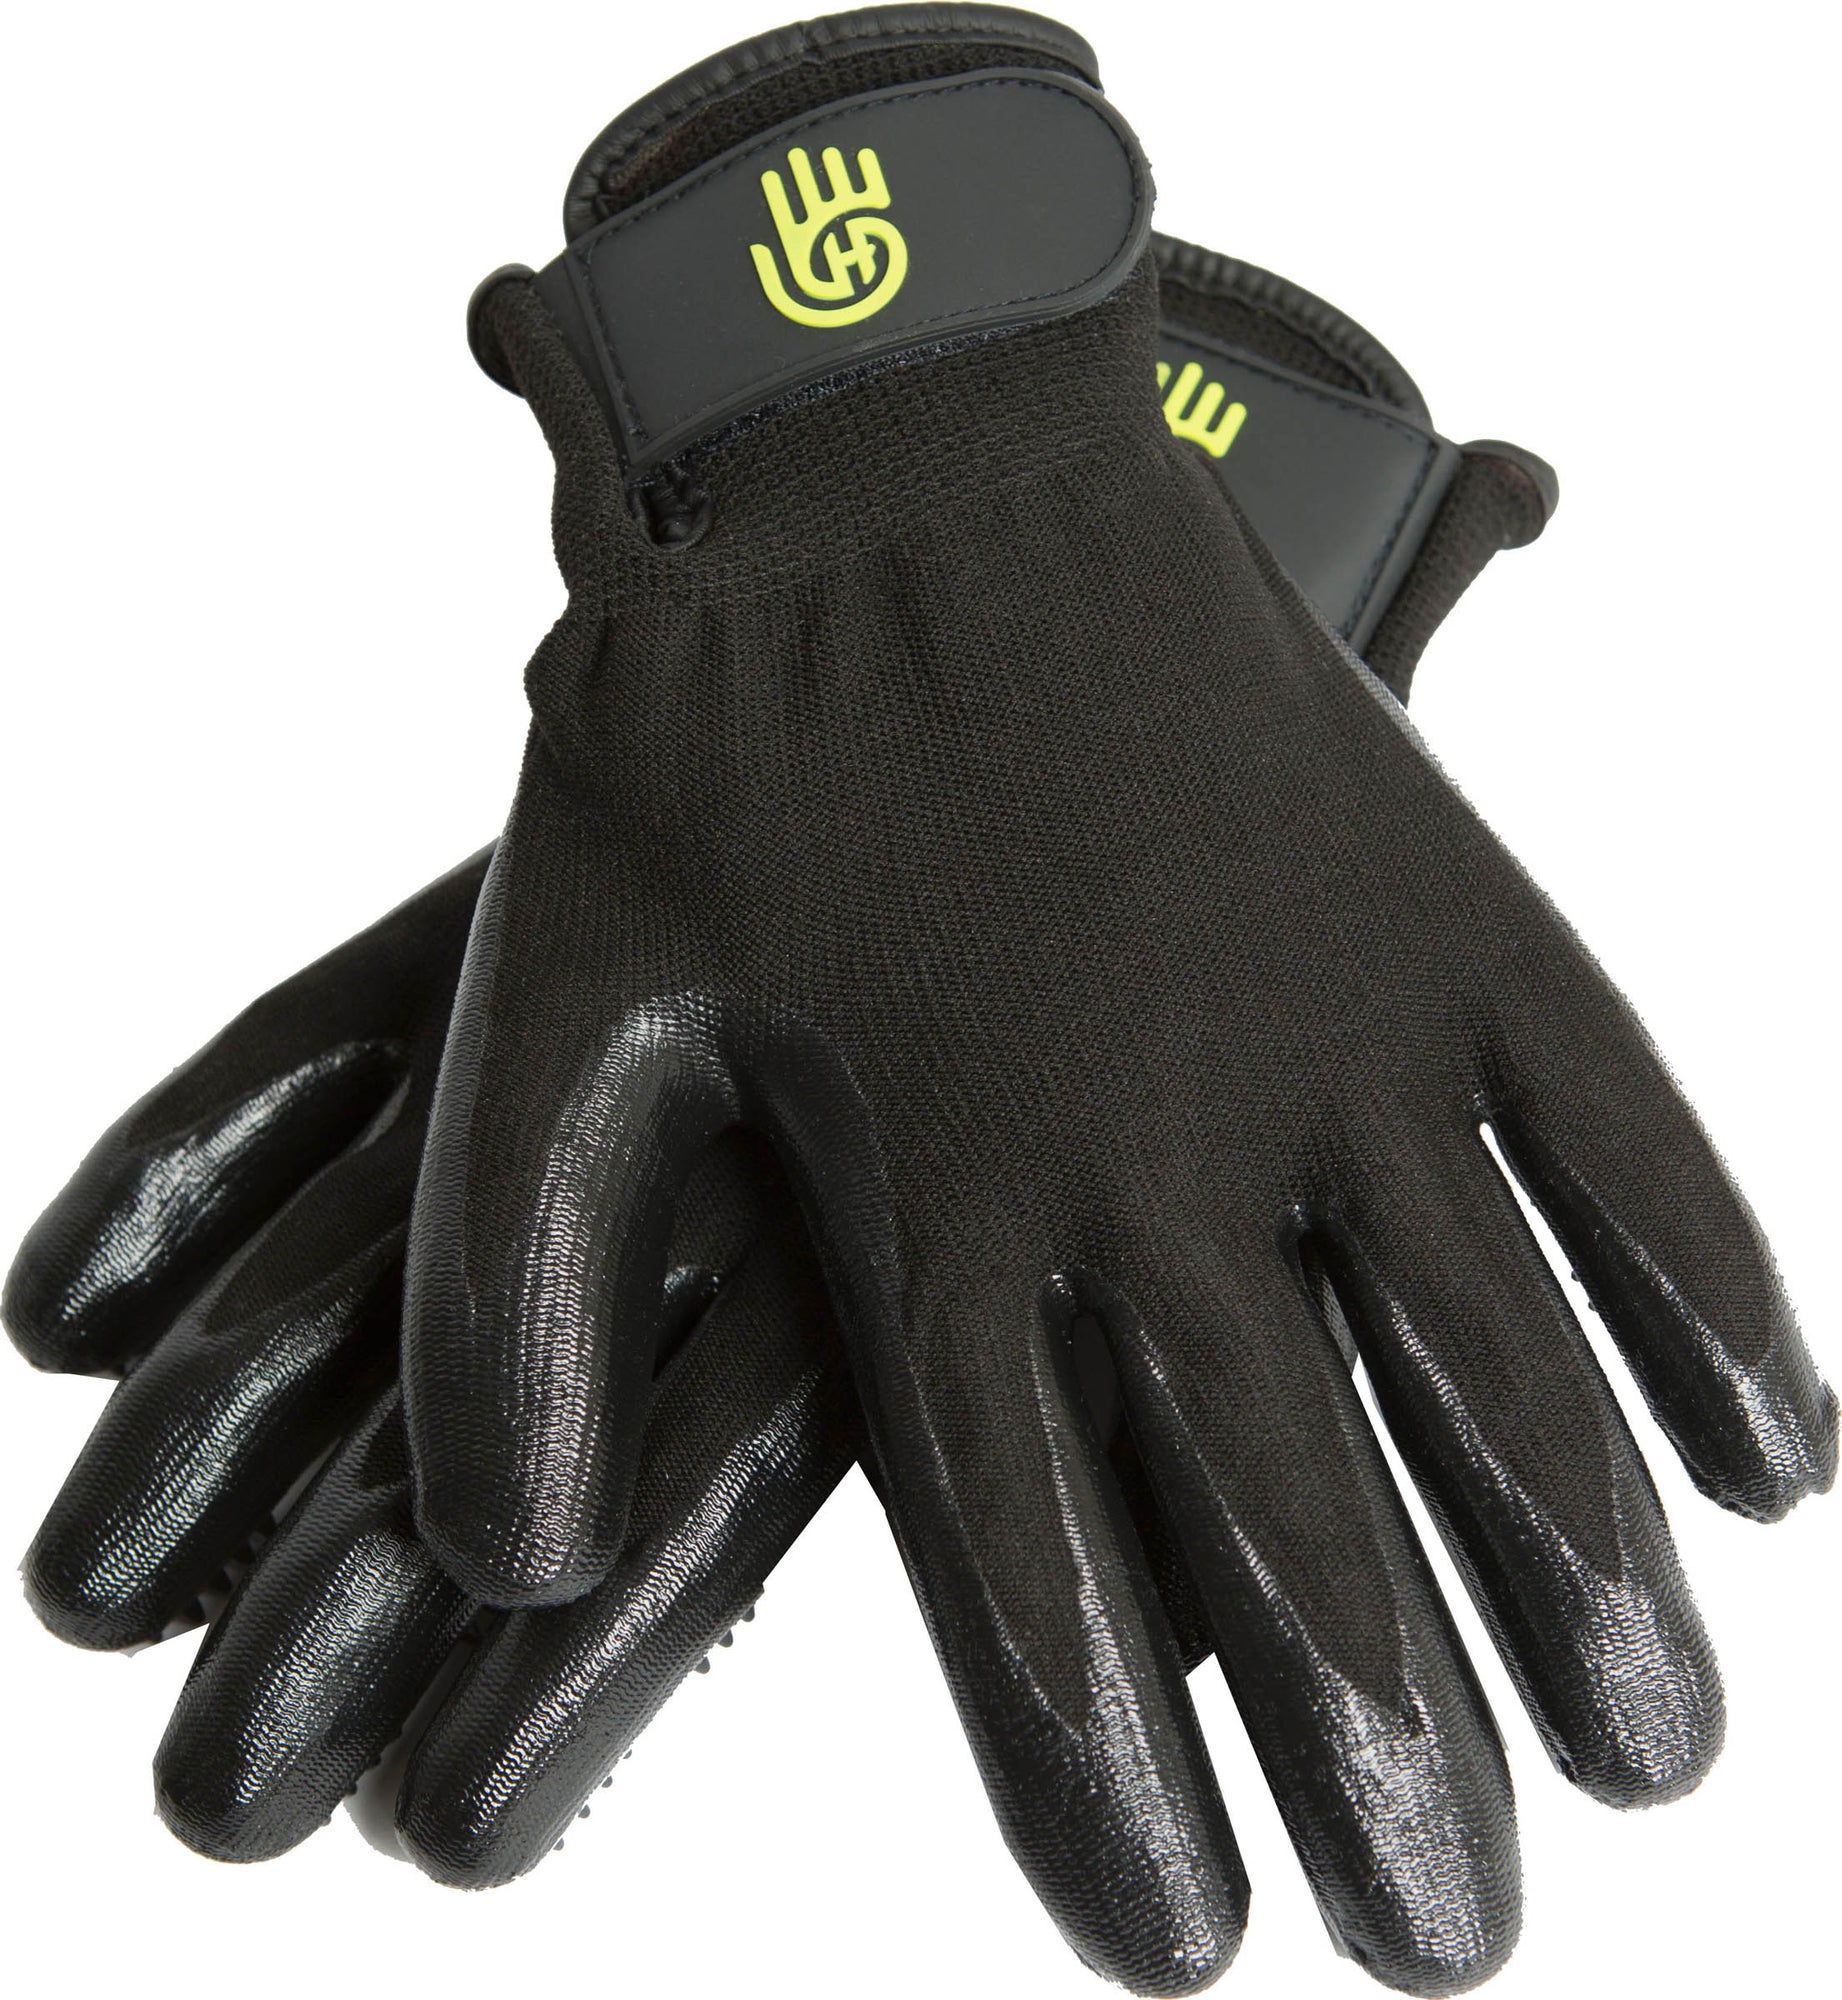 HandsOn Grooming and Bathing Gloves